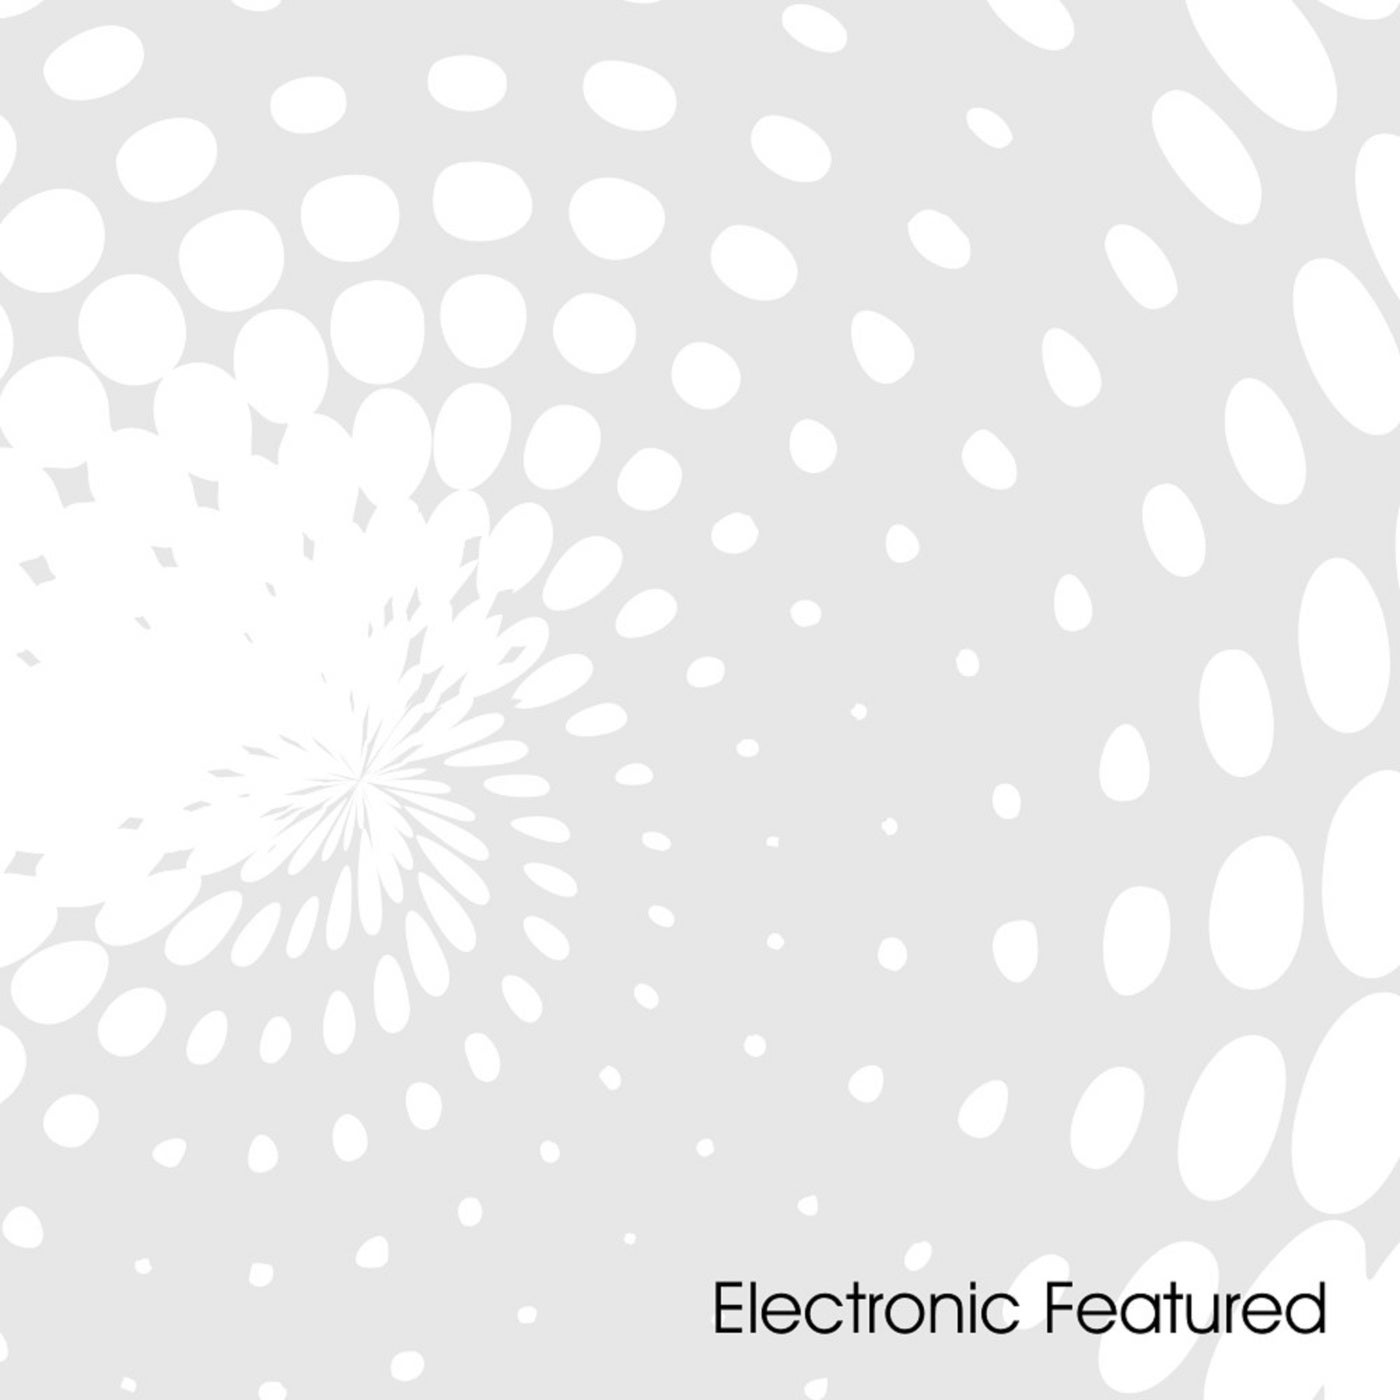 Electronic Featured